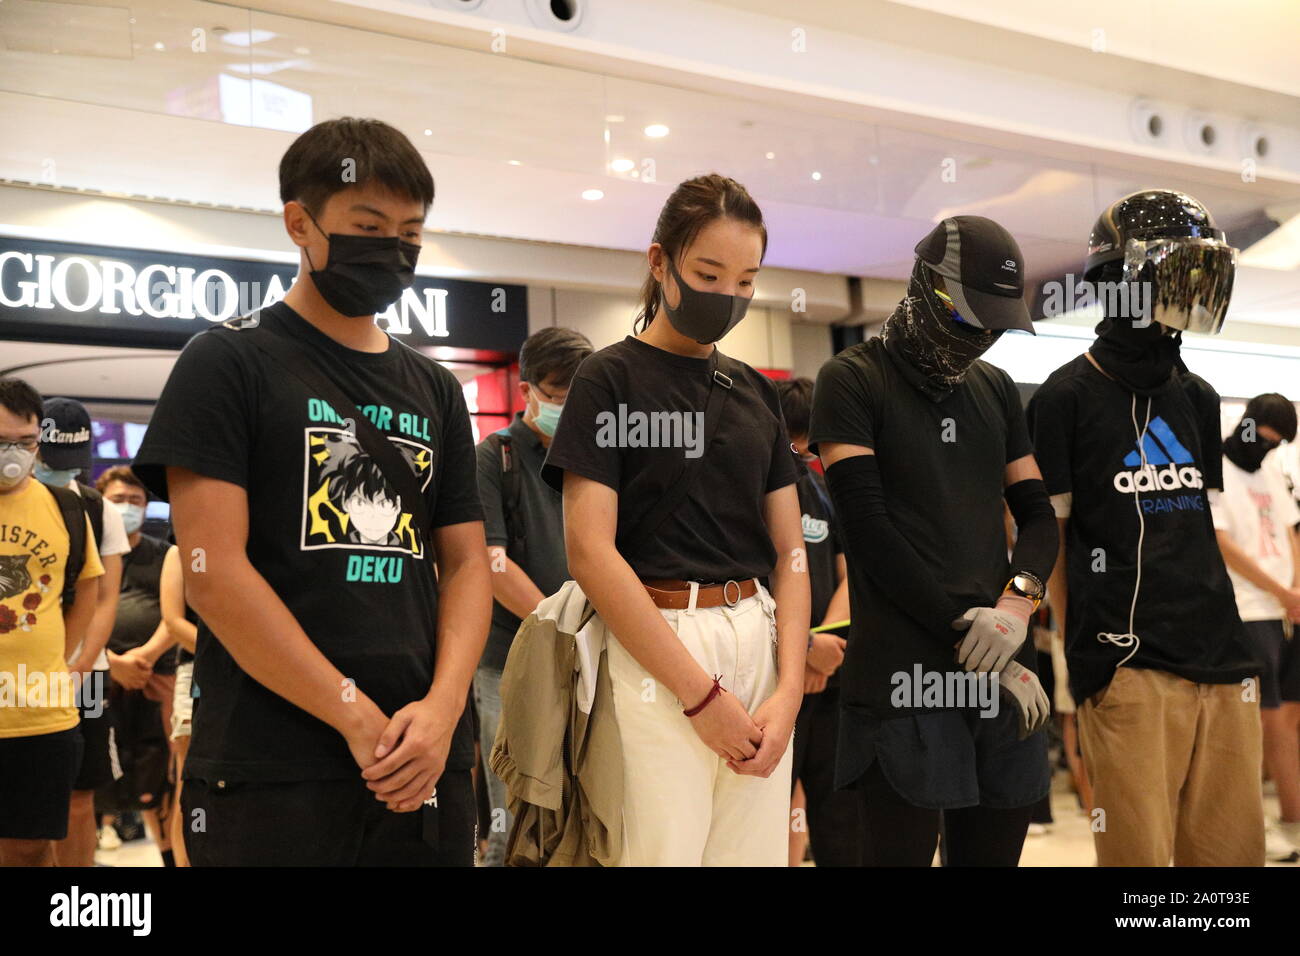 Hong Kong. 21st Sept 2019. Hong Kong Protesters held a sit in and singing session inside Yoho Mall in Yuen Long to mark 2 months since alleged triad attacks at Yuen Long MTR station Credit: David Coulson/Alamy Live News Stock Photo